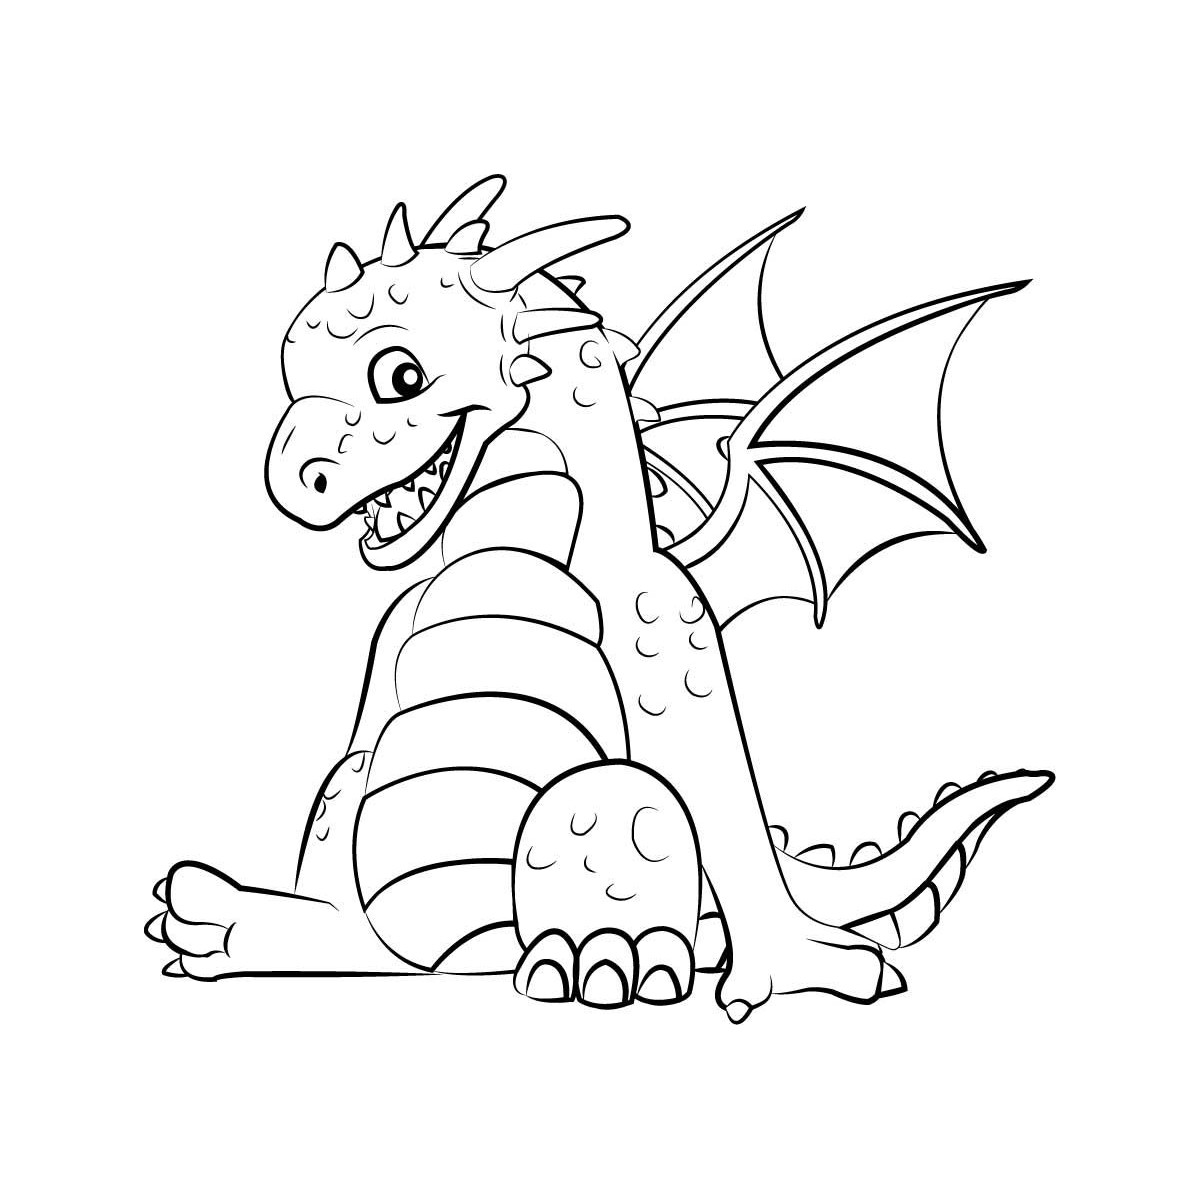 Baby Dragon Coloring Page
 Dragon Coloring Pages